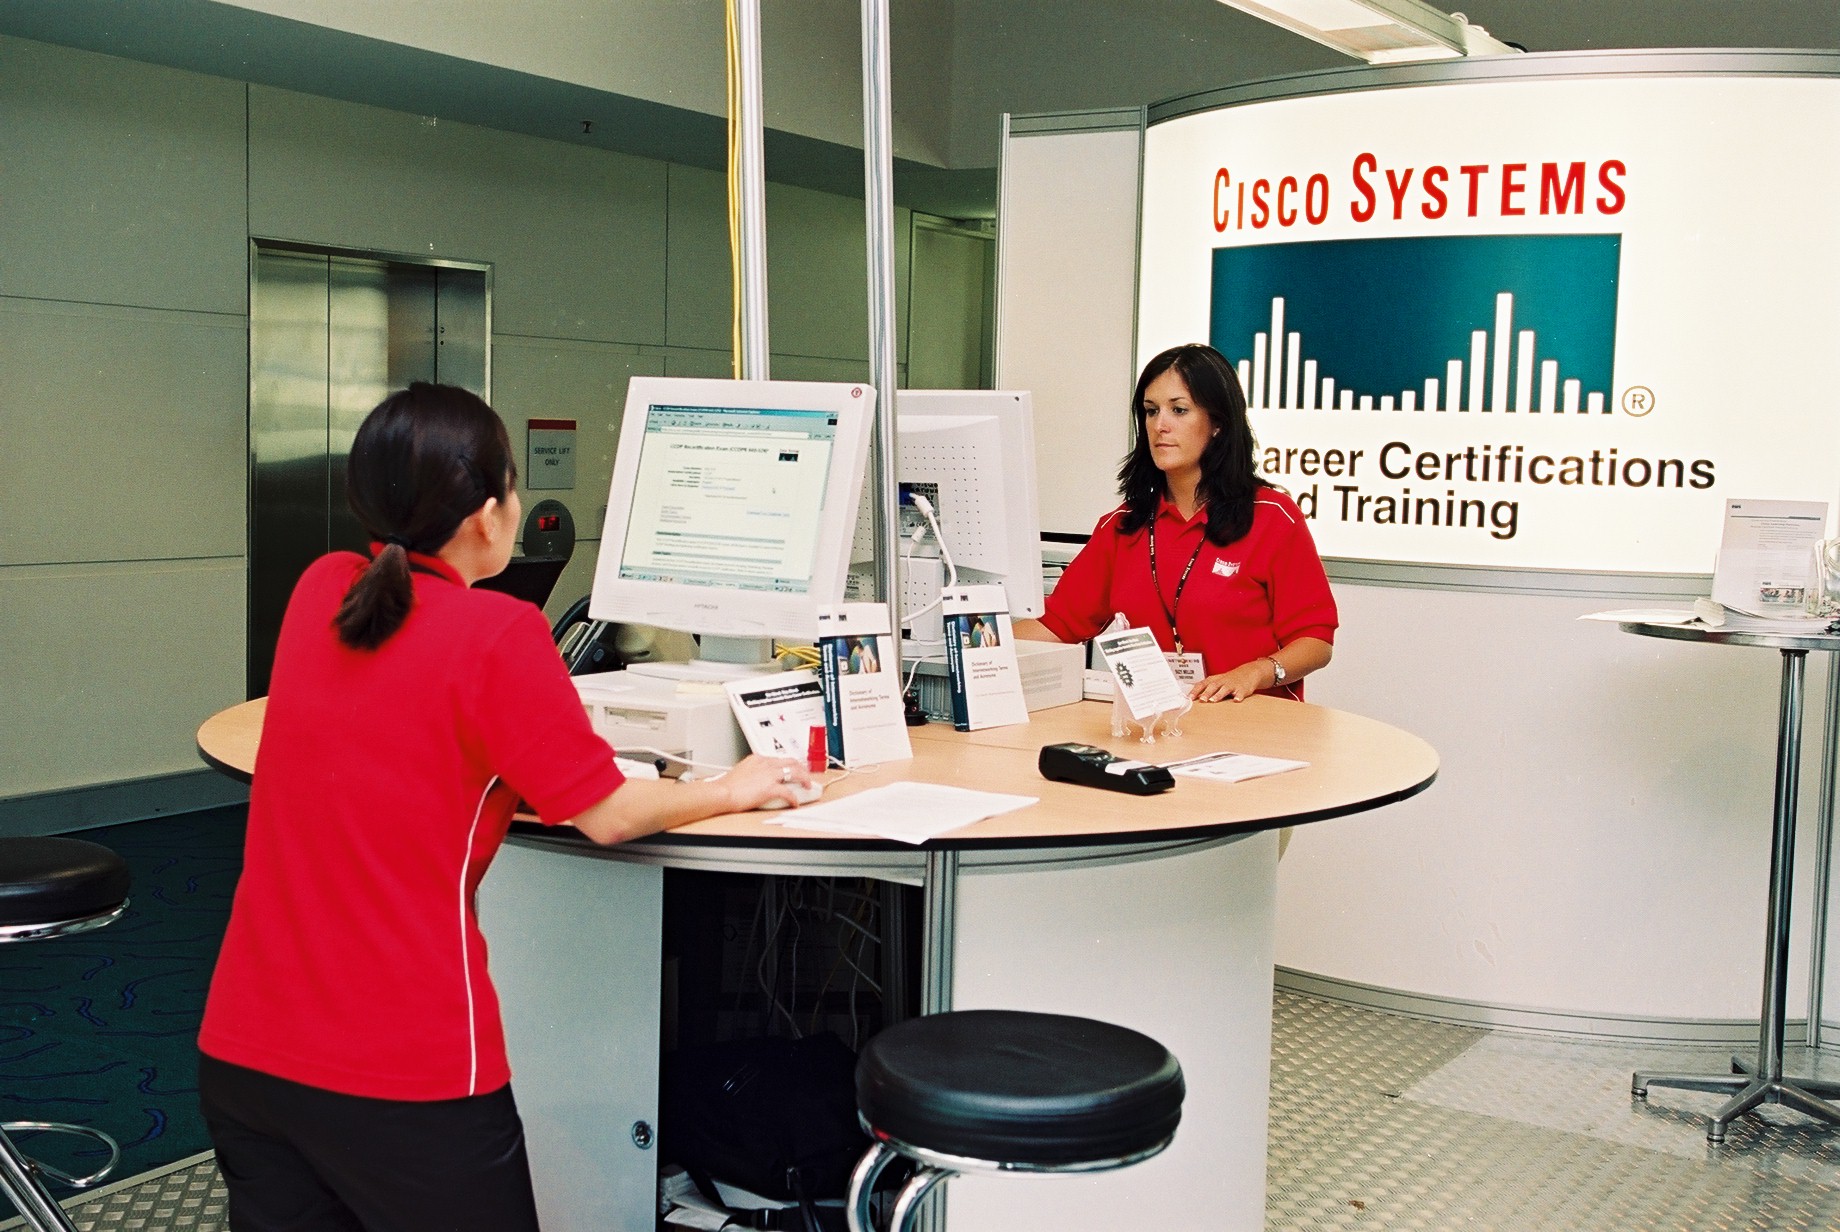 Two cisco representatives stand at computer terminals in front of the Cisco Systems Career Certification and Training booth at Networkers